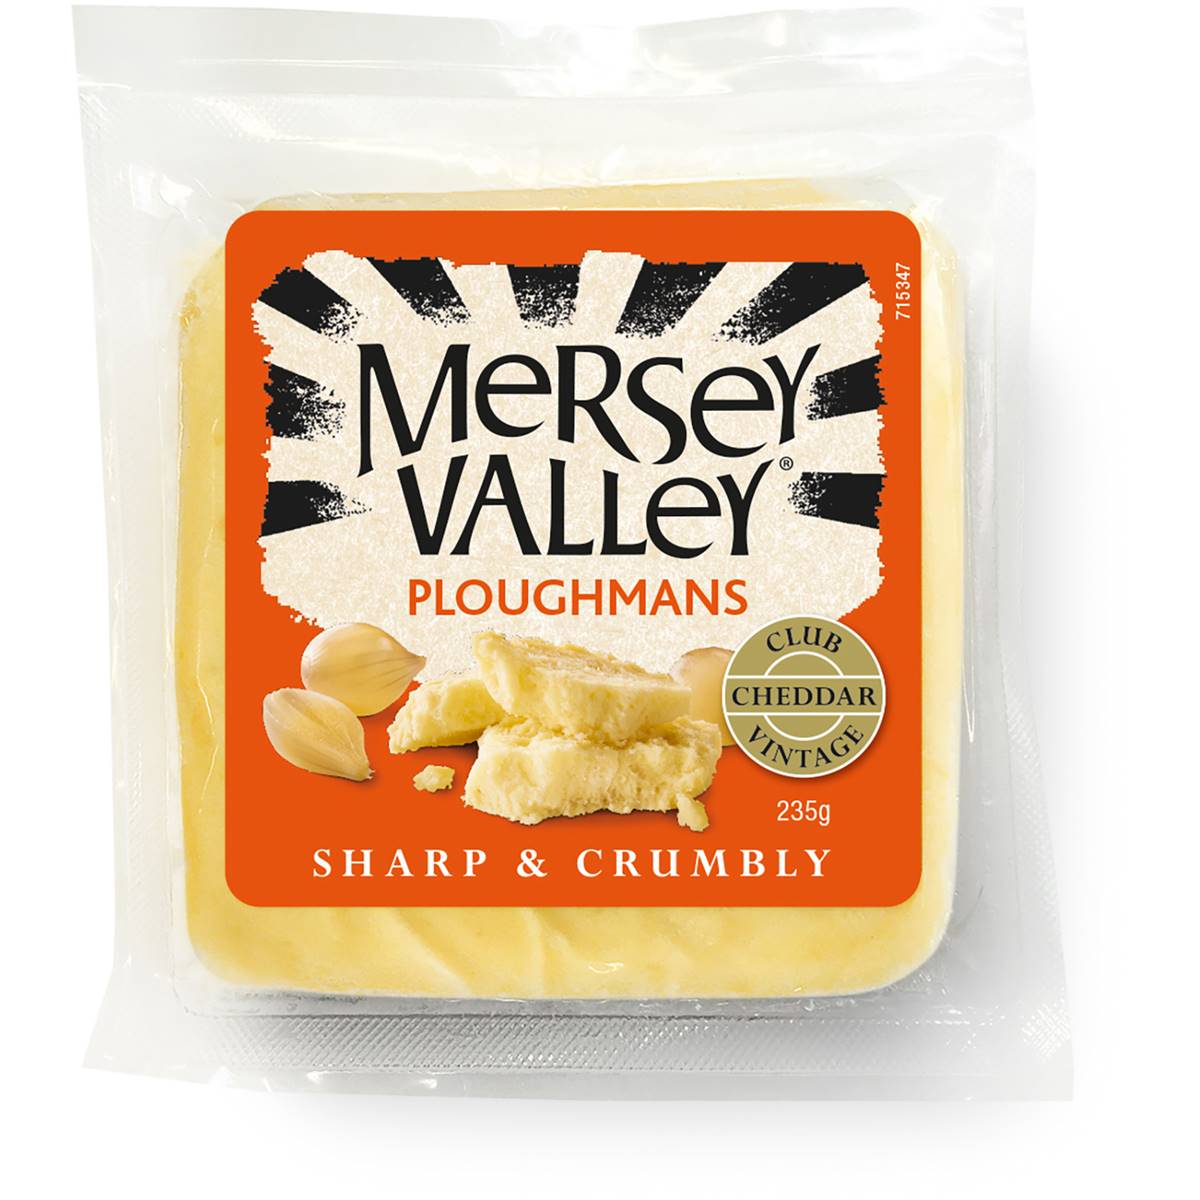 Mersey Valley Sharp & Crumbly Ploughmans 235g